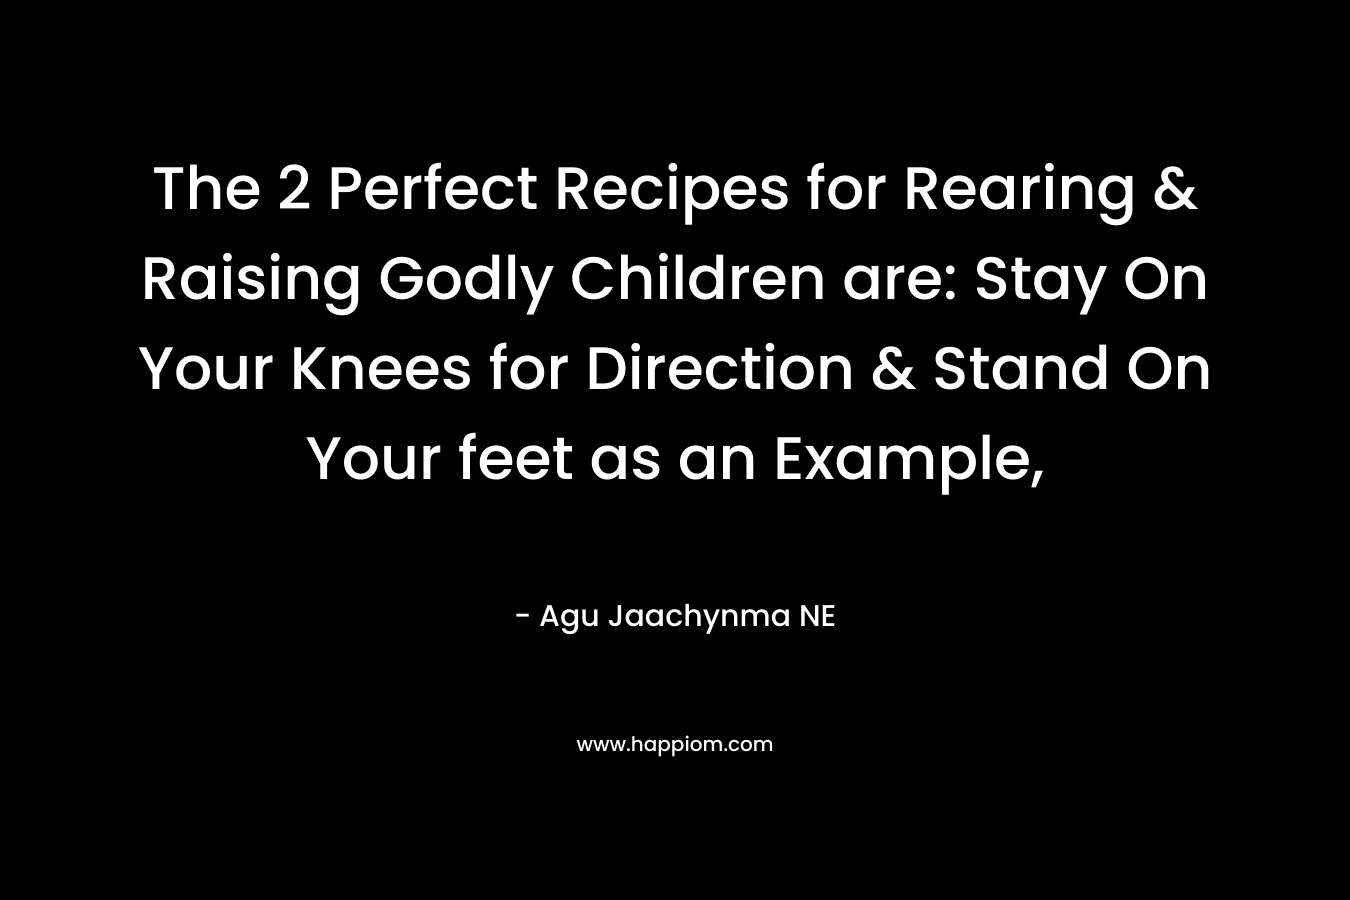 The 2 Perfect Recipes for Rearing & Raising Godly Children are: Stay On Your Knees for Direction & Stand On Your feet as an Example,